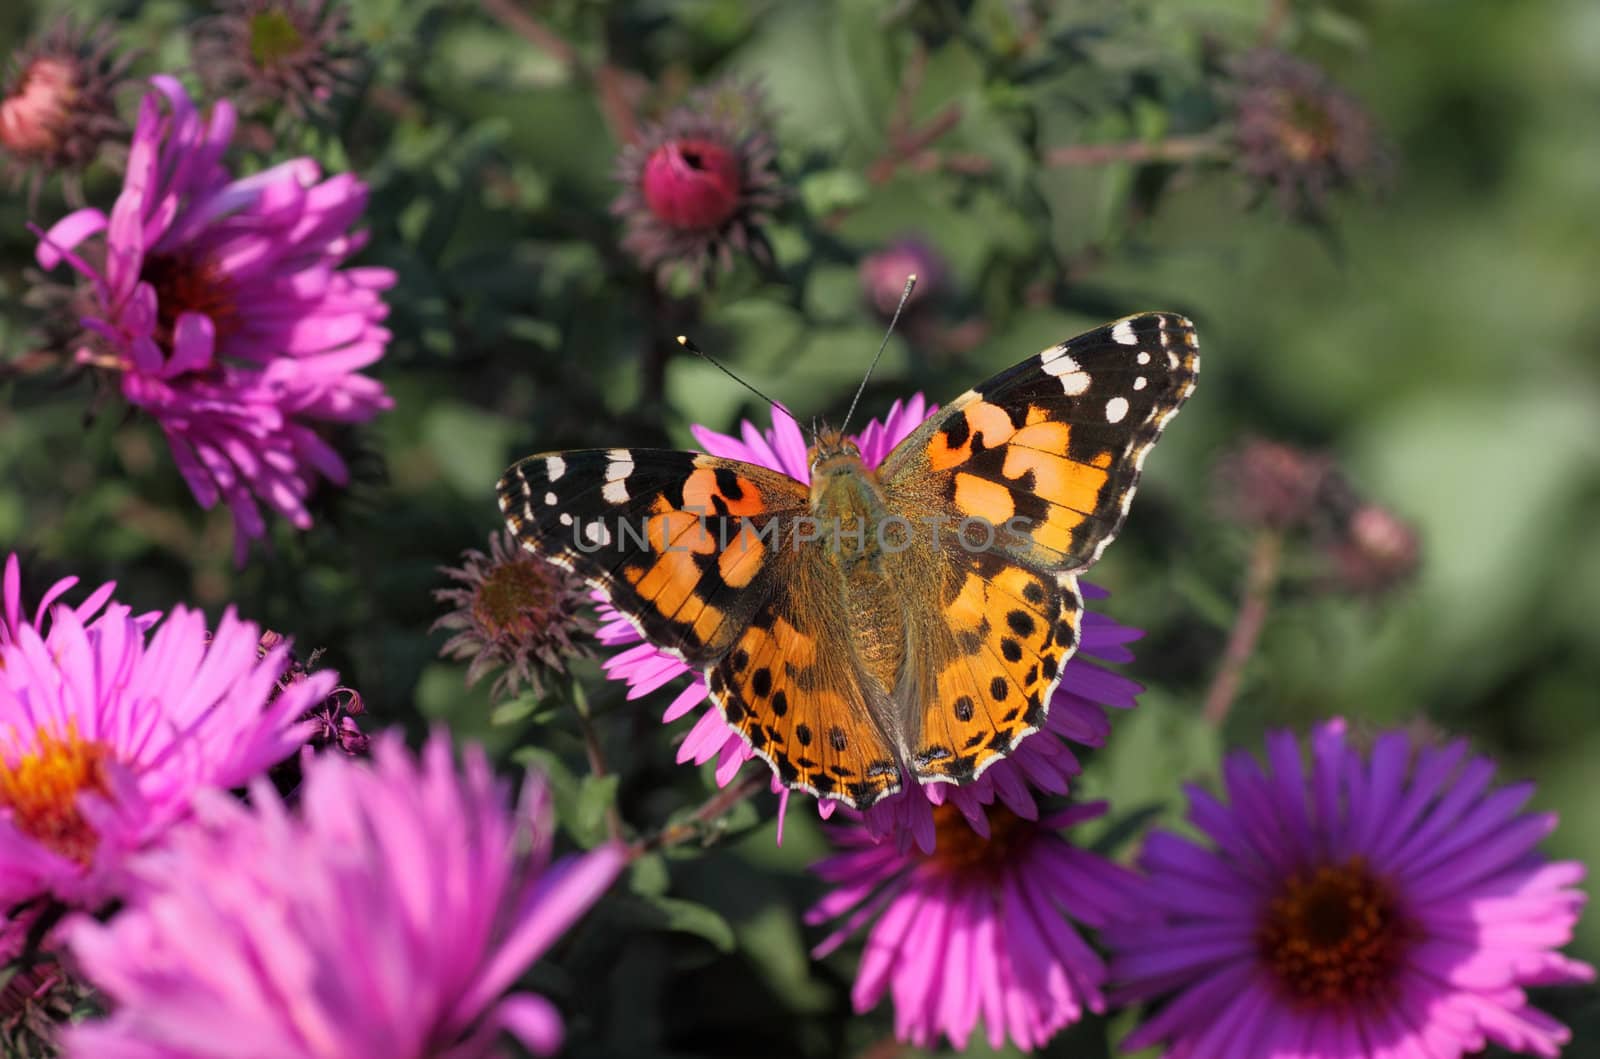 Painted Lady butterfly on flower (chrysanthemum)